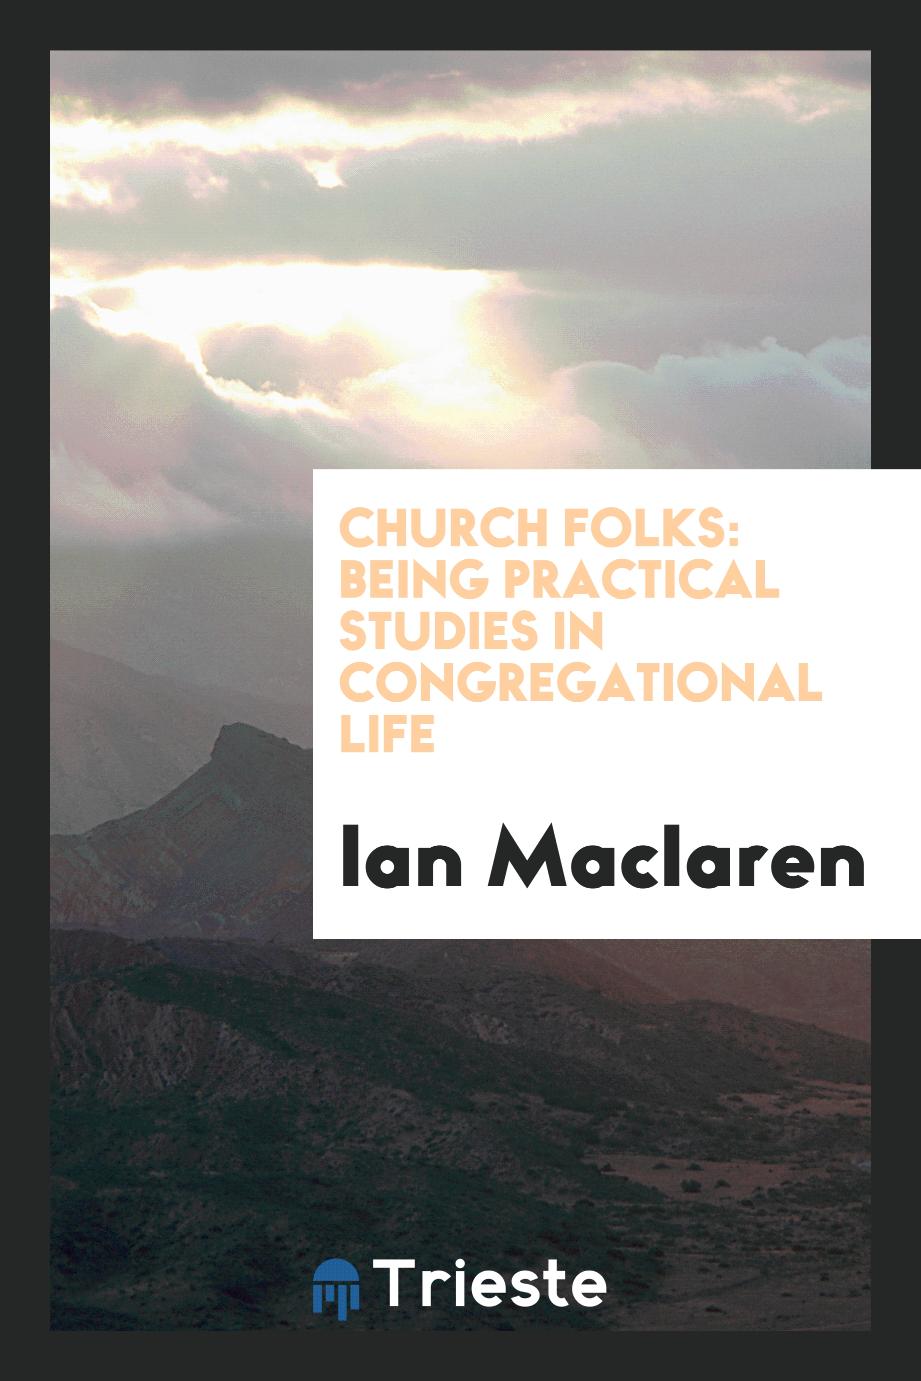 Church folks: being practical studies in congregational life